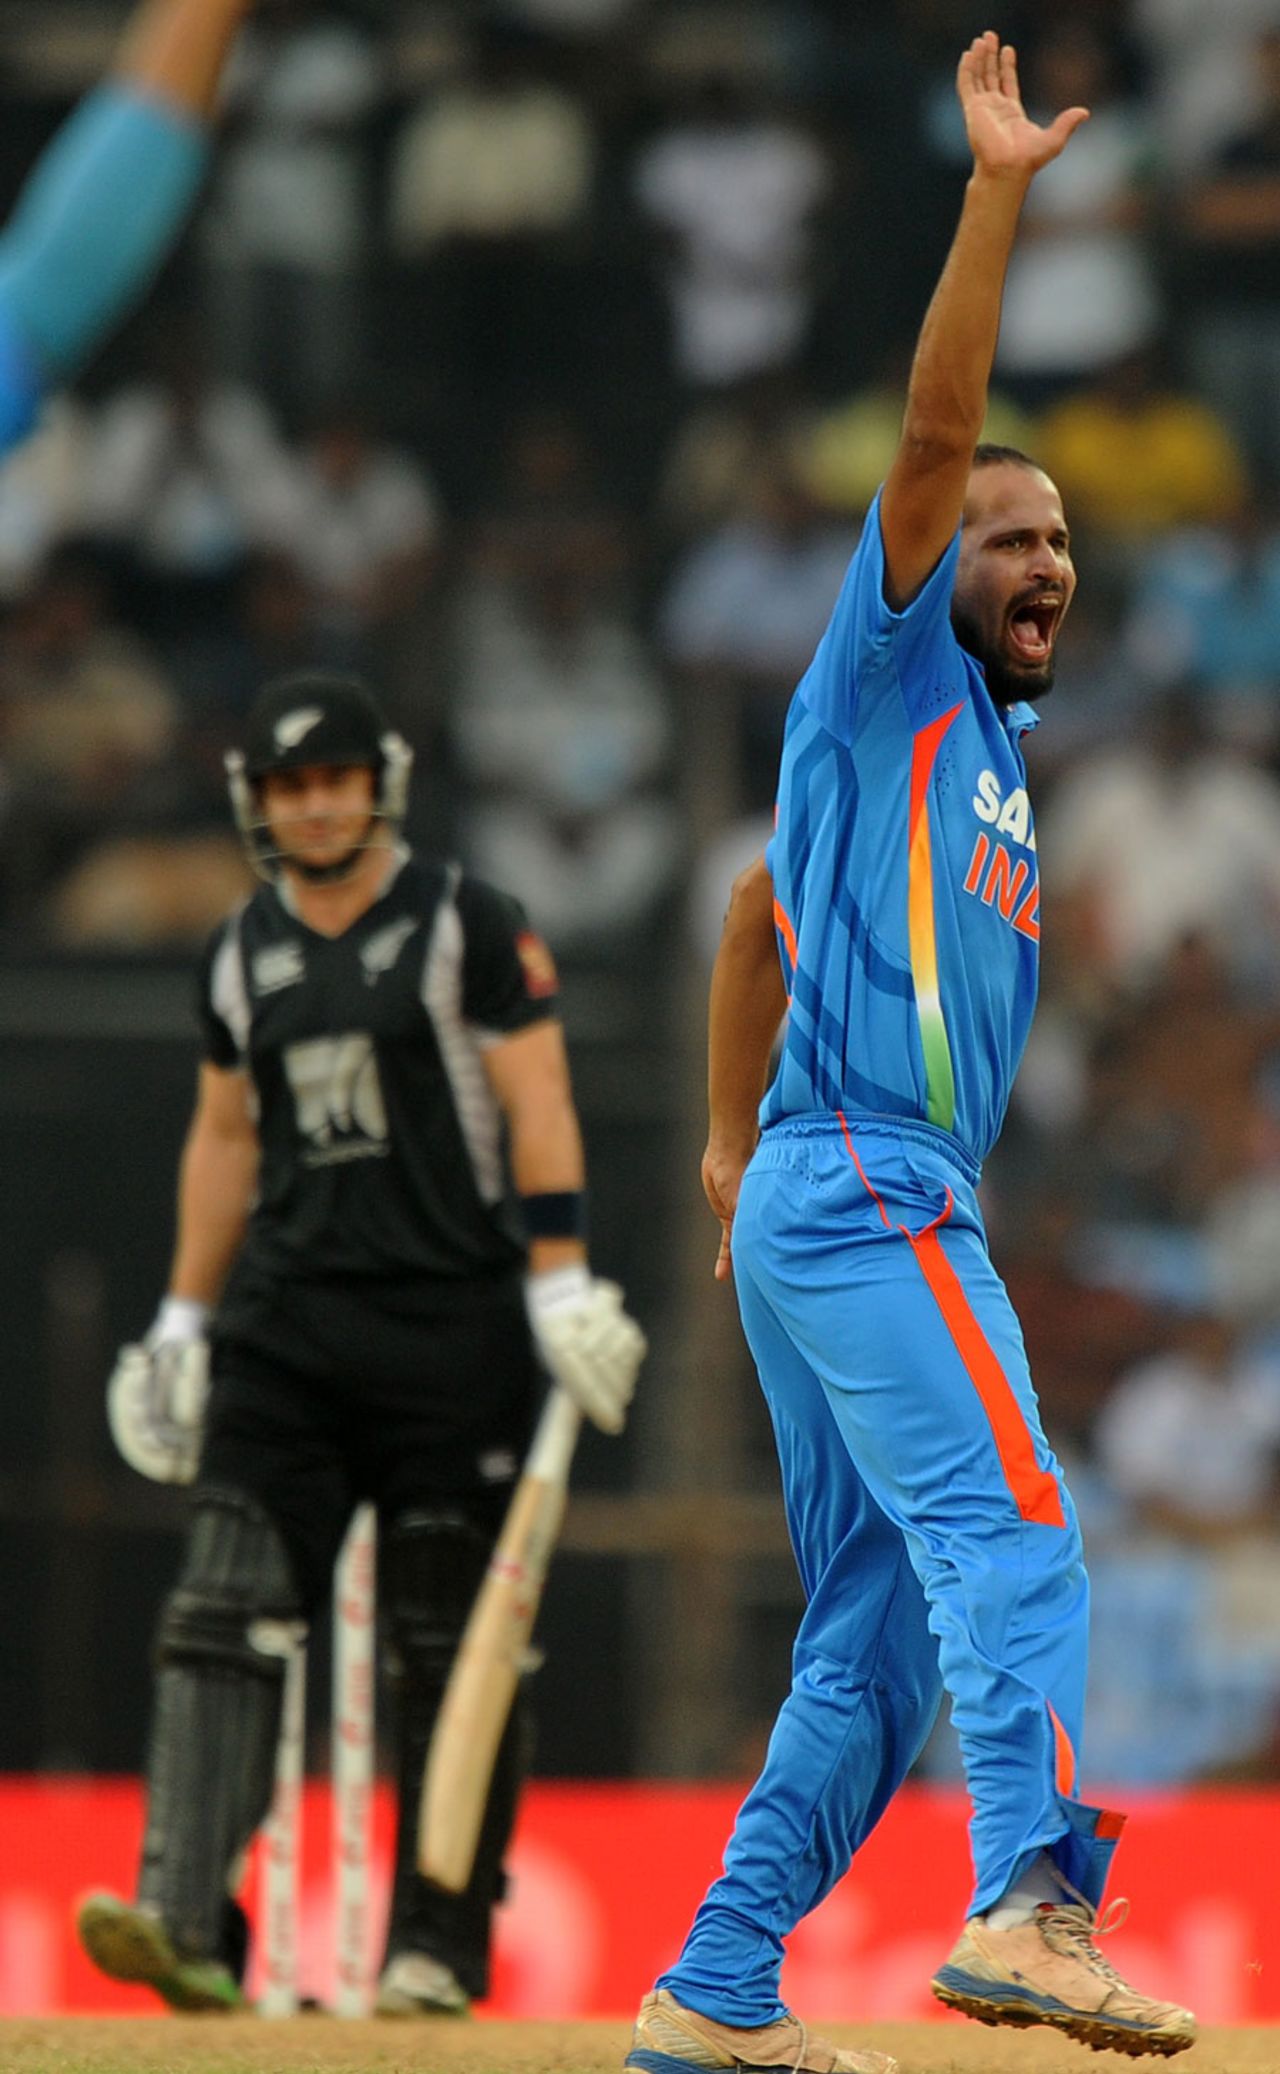 Yusuf Pathan gets his second wicket, dismissing Nathan McCullum, India v New Zealand, 5th ODI, Chennai, December 10, 2010